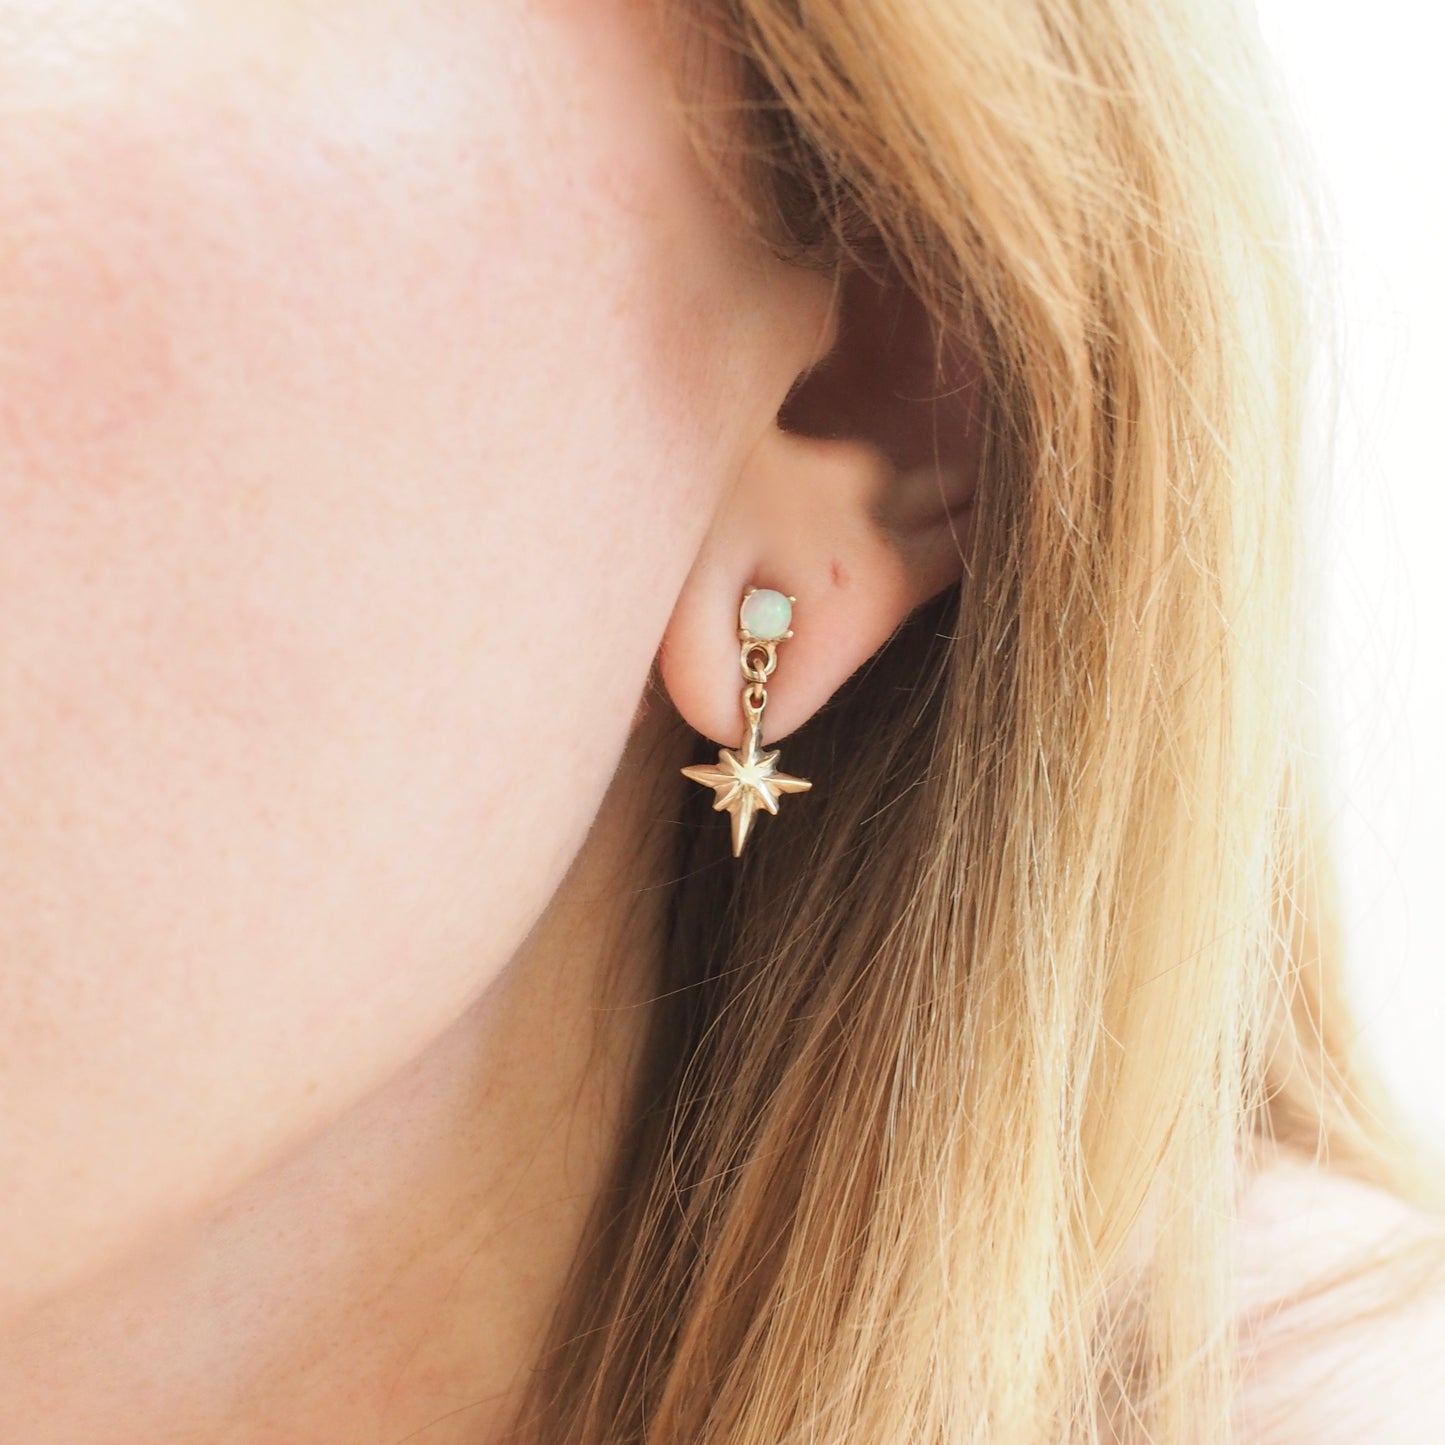 Tiny star earrings in gold tone bronze, set with opals. Shown on a model for scle